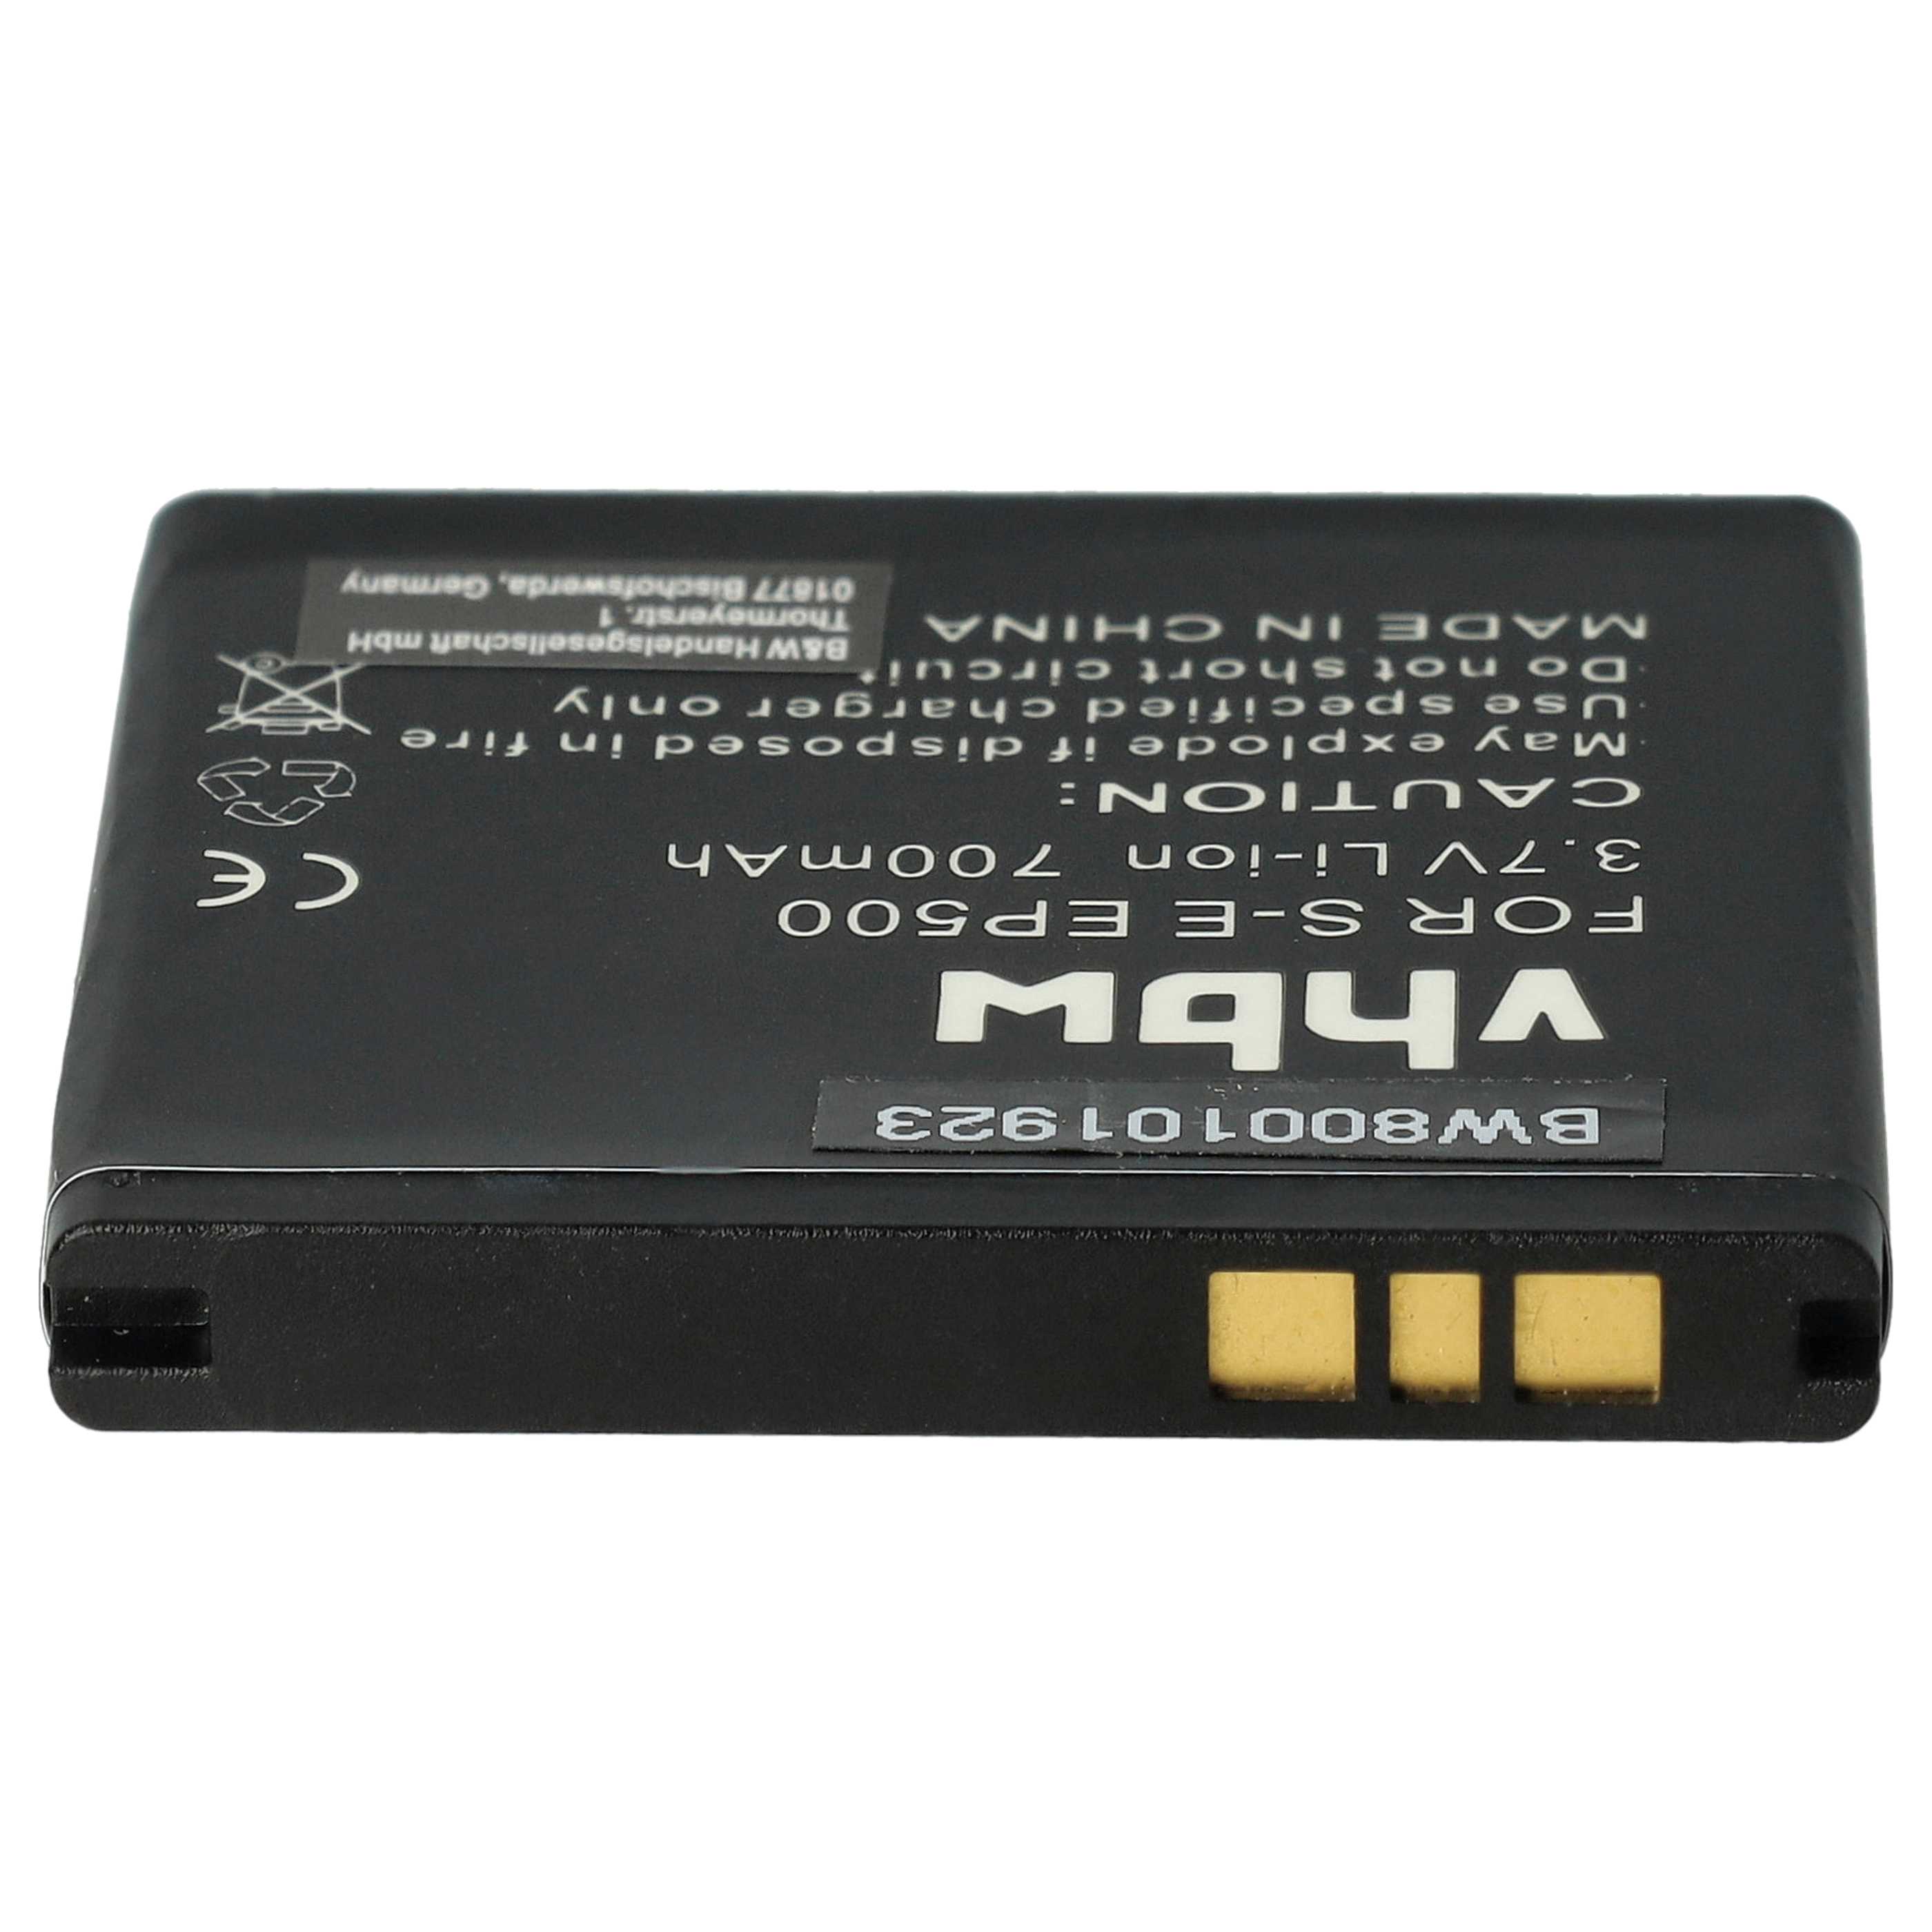 Mobile Phone Battery Replacement for Sony-Ericsson EP500 - 700mAh 3.7V Li-Ion